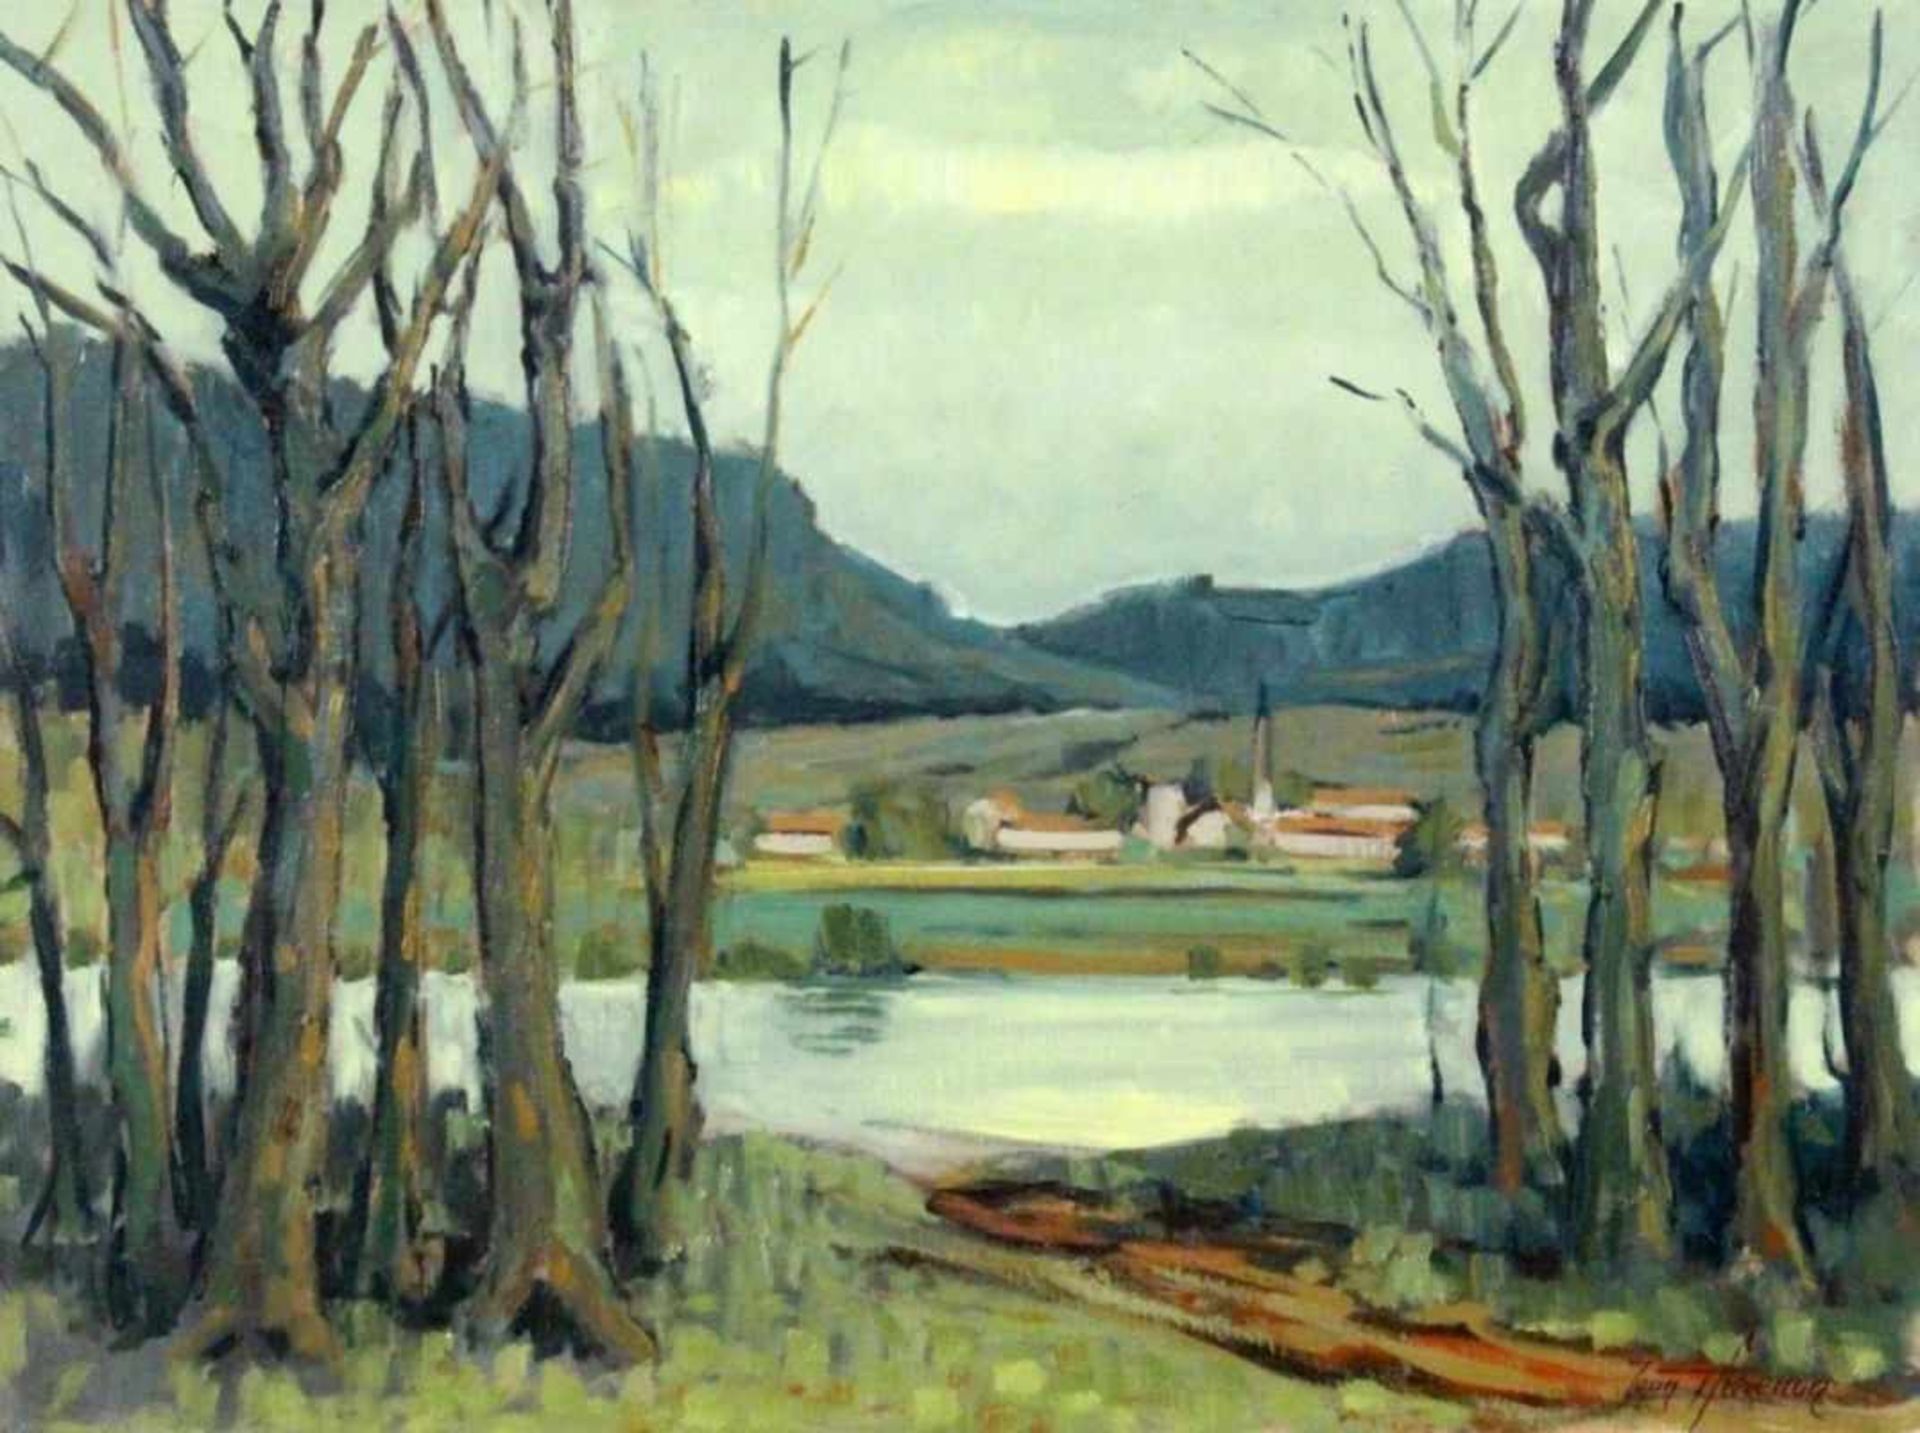 THEVENON, JEAN France, 20thcentury View of a village on the river. Oil on canvas, signed.